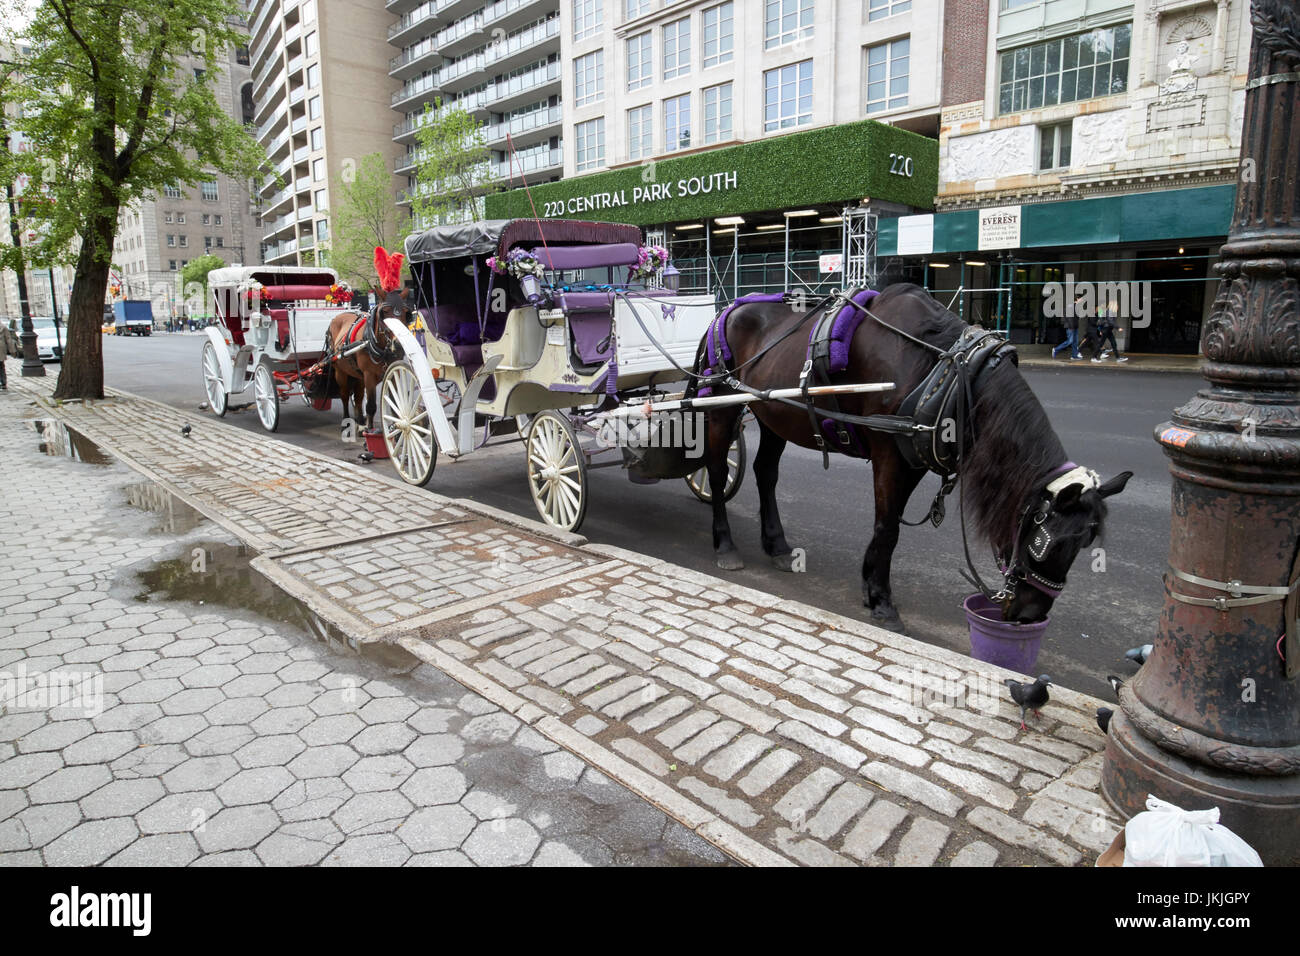 horse drawn carriages on central park south New York City USA Stock Photo